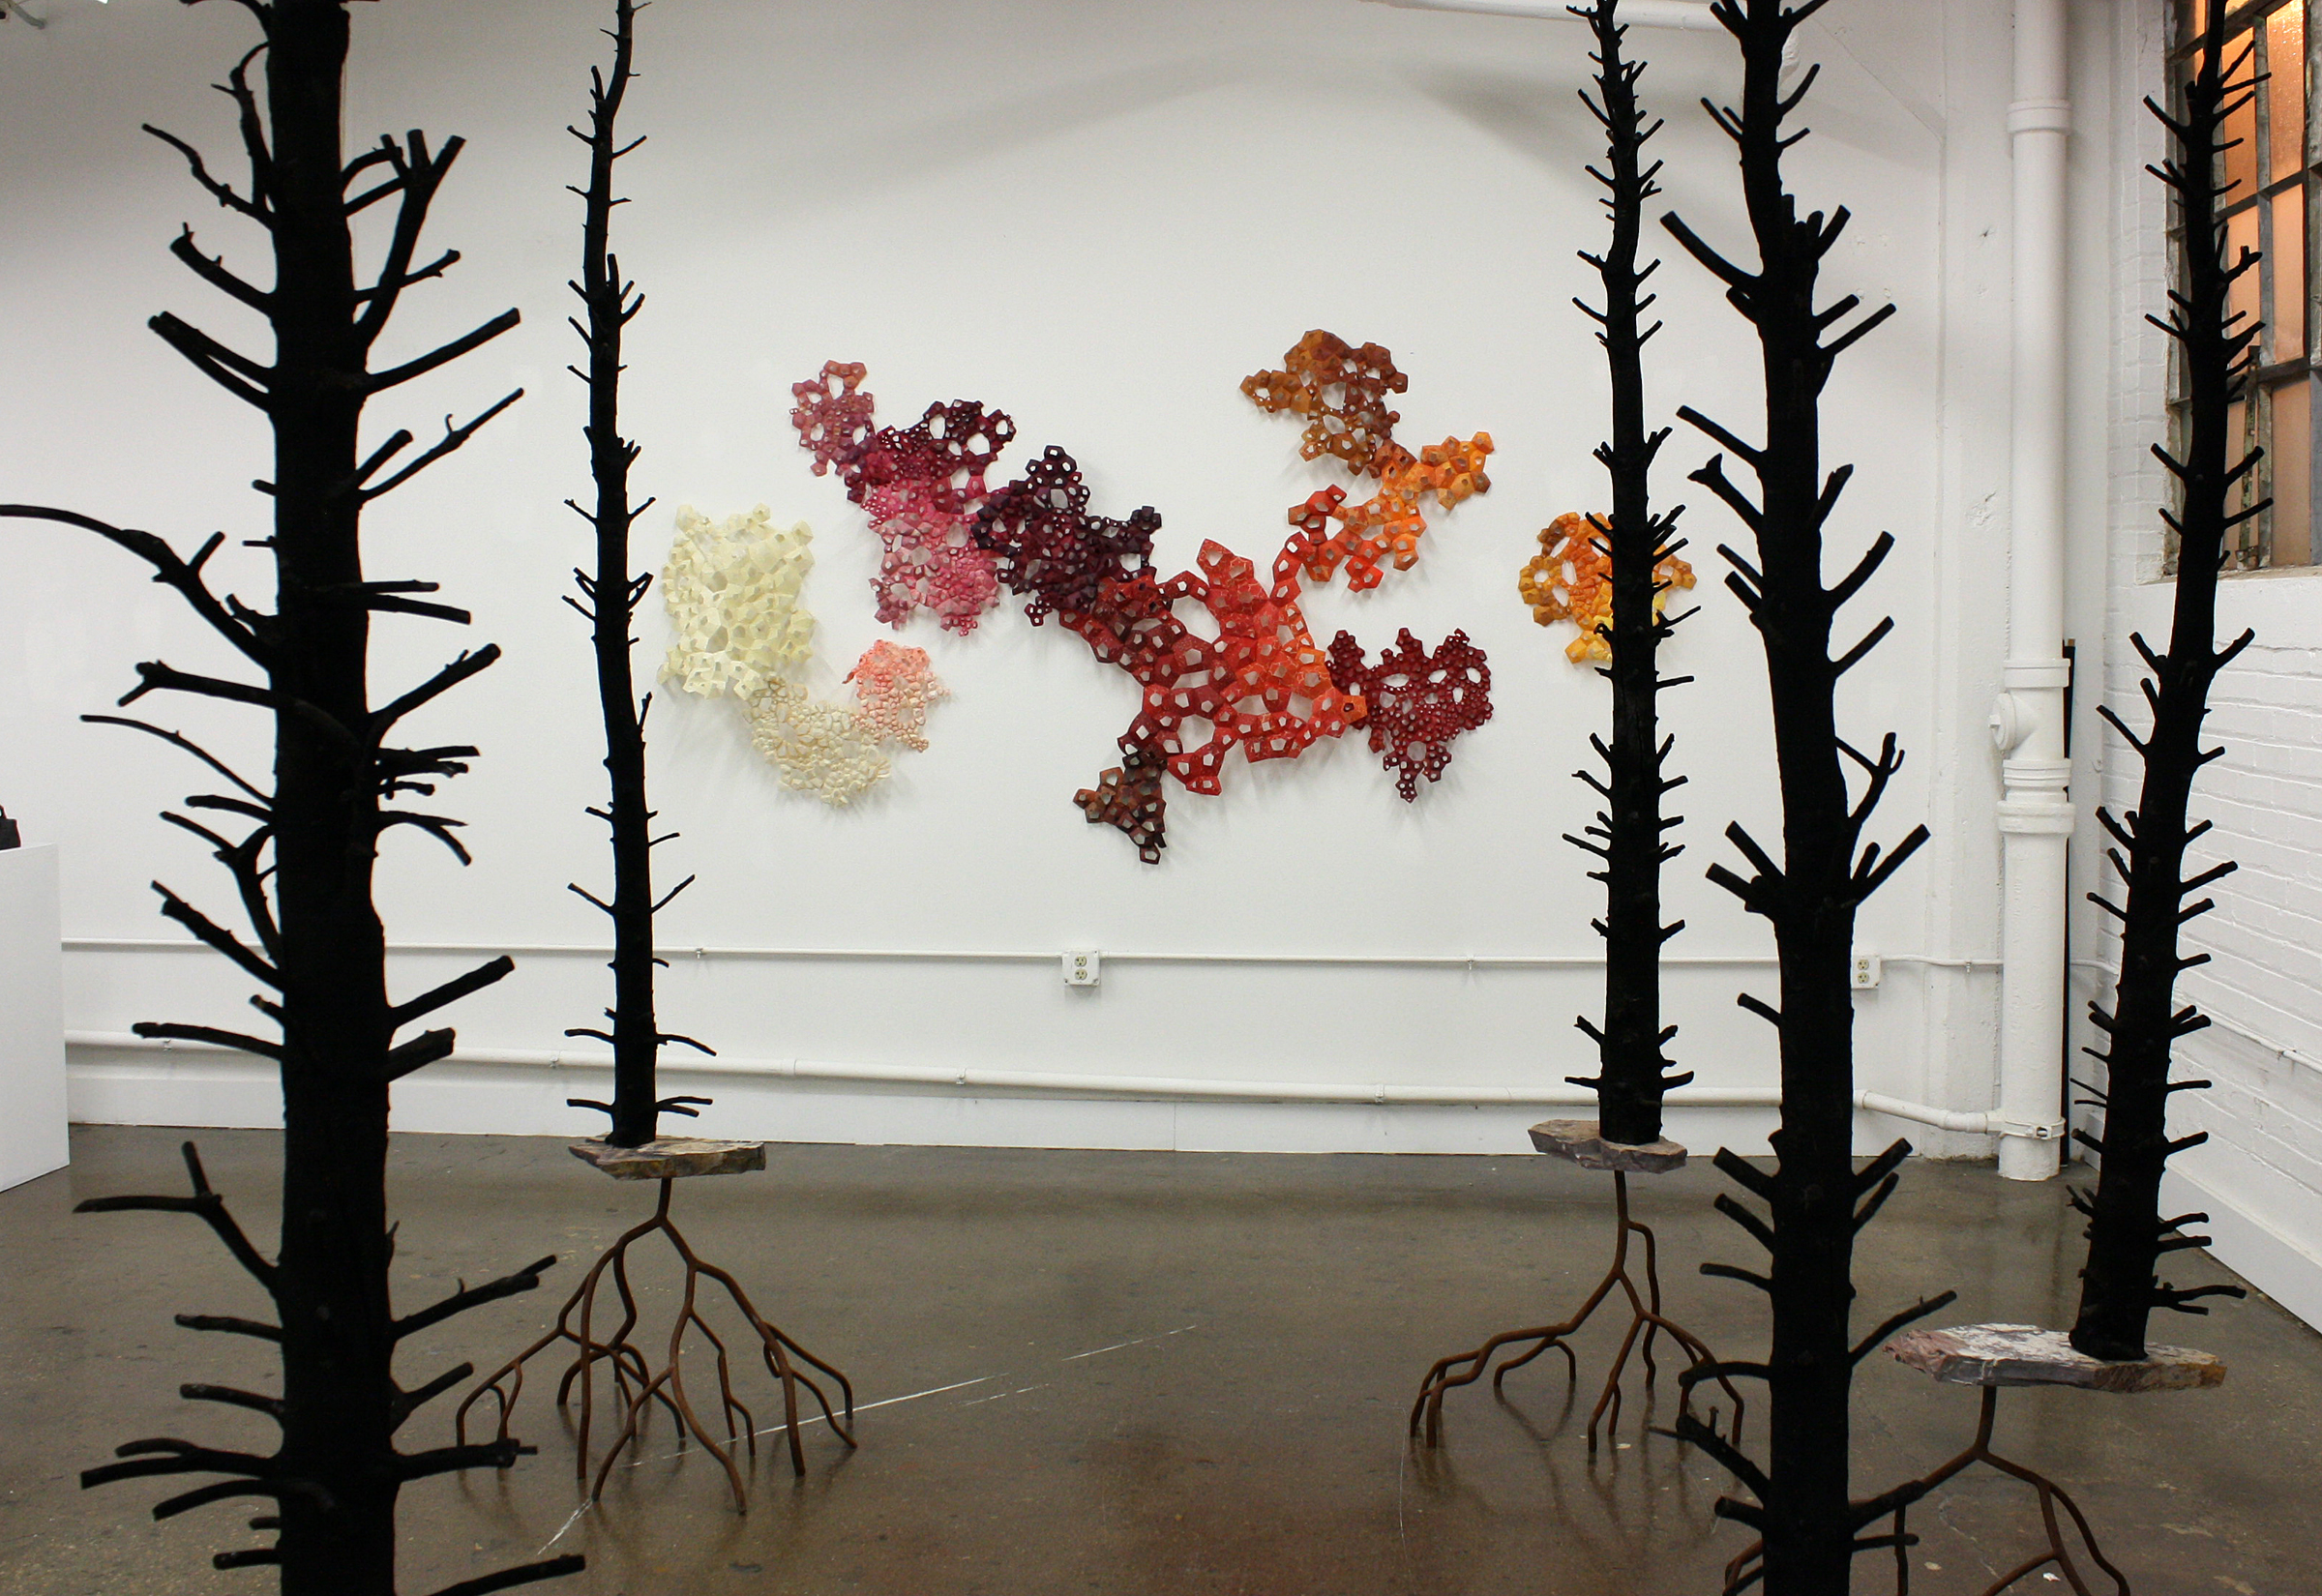  From g roup exhibition "Rooted"   Stutz Artspace - Indianapolis, IN.  2013 